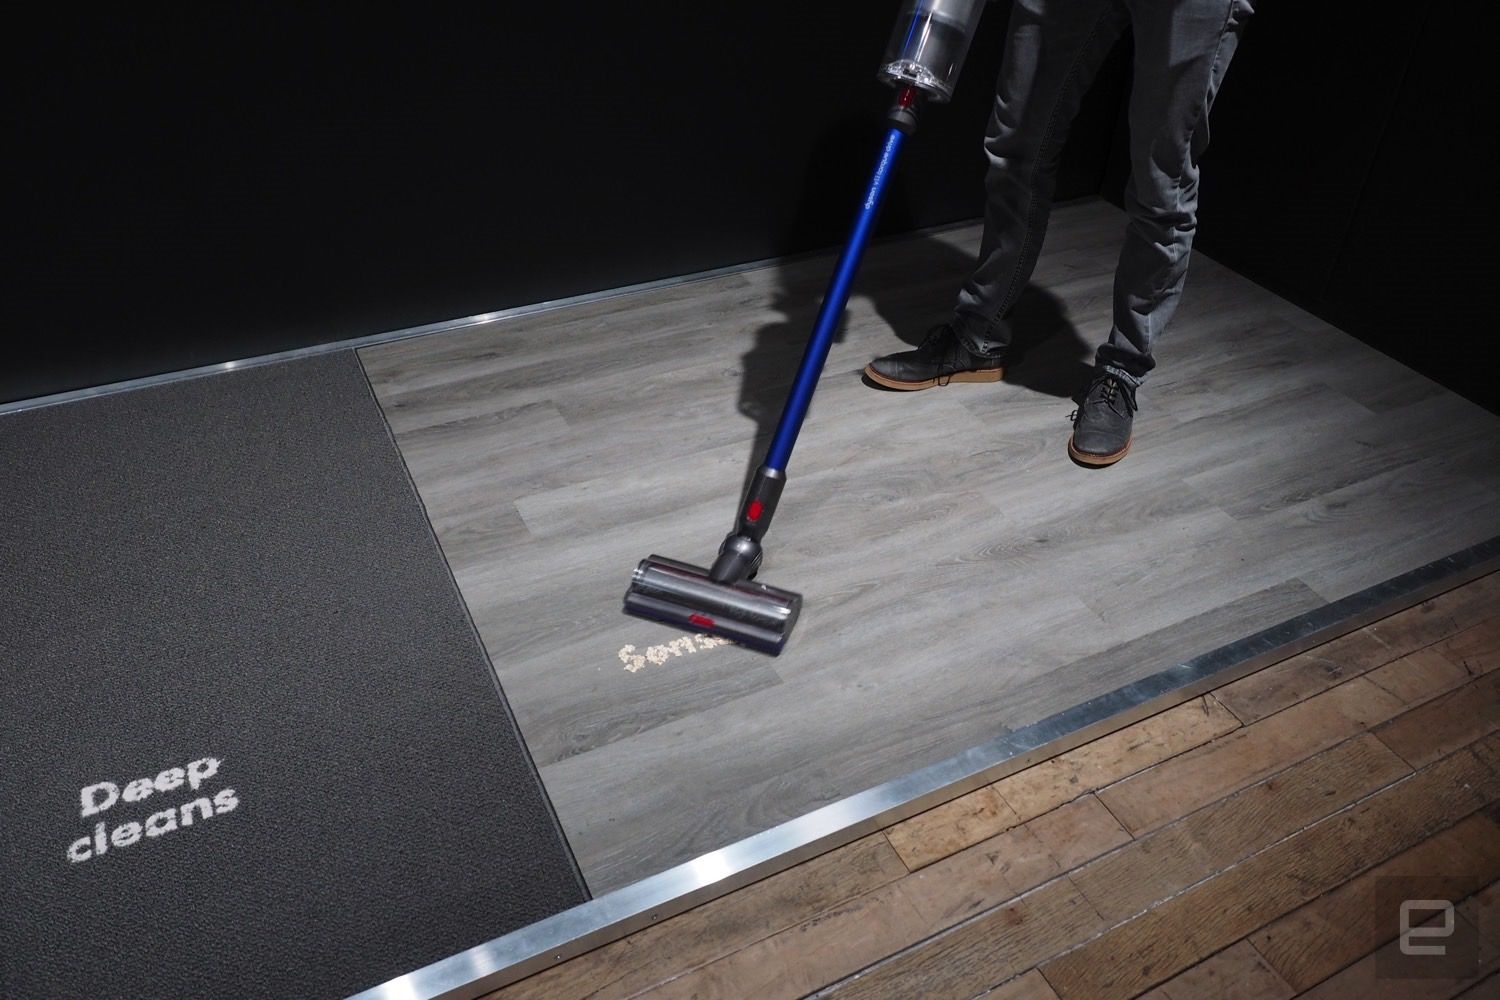 Dyson's latest handheld vacuum works smarter, not harder | DeviceDaily.com